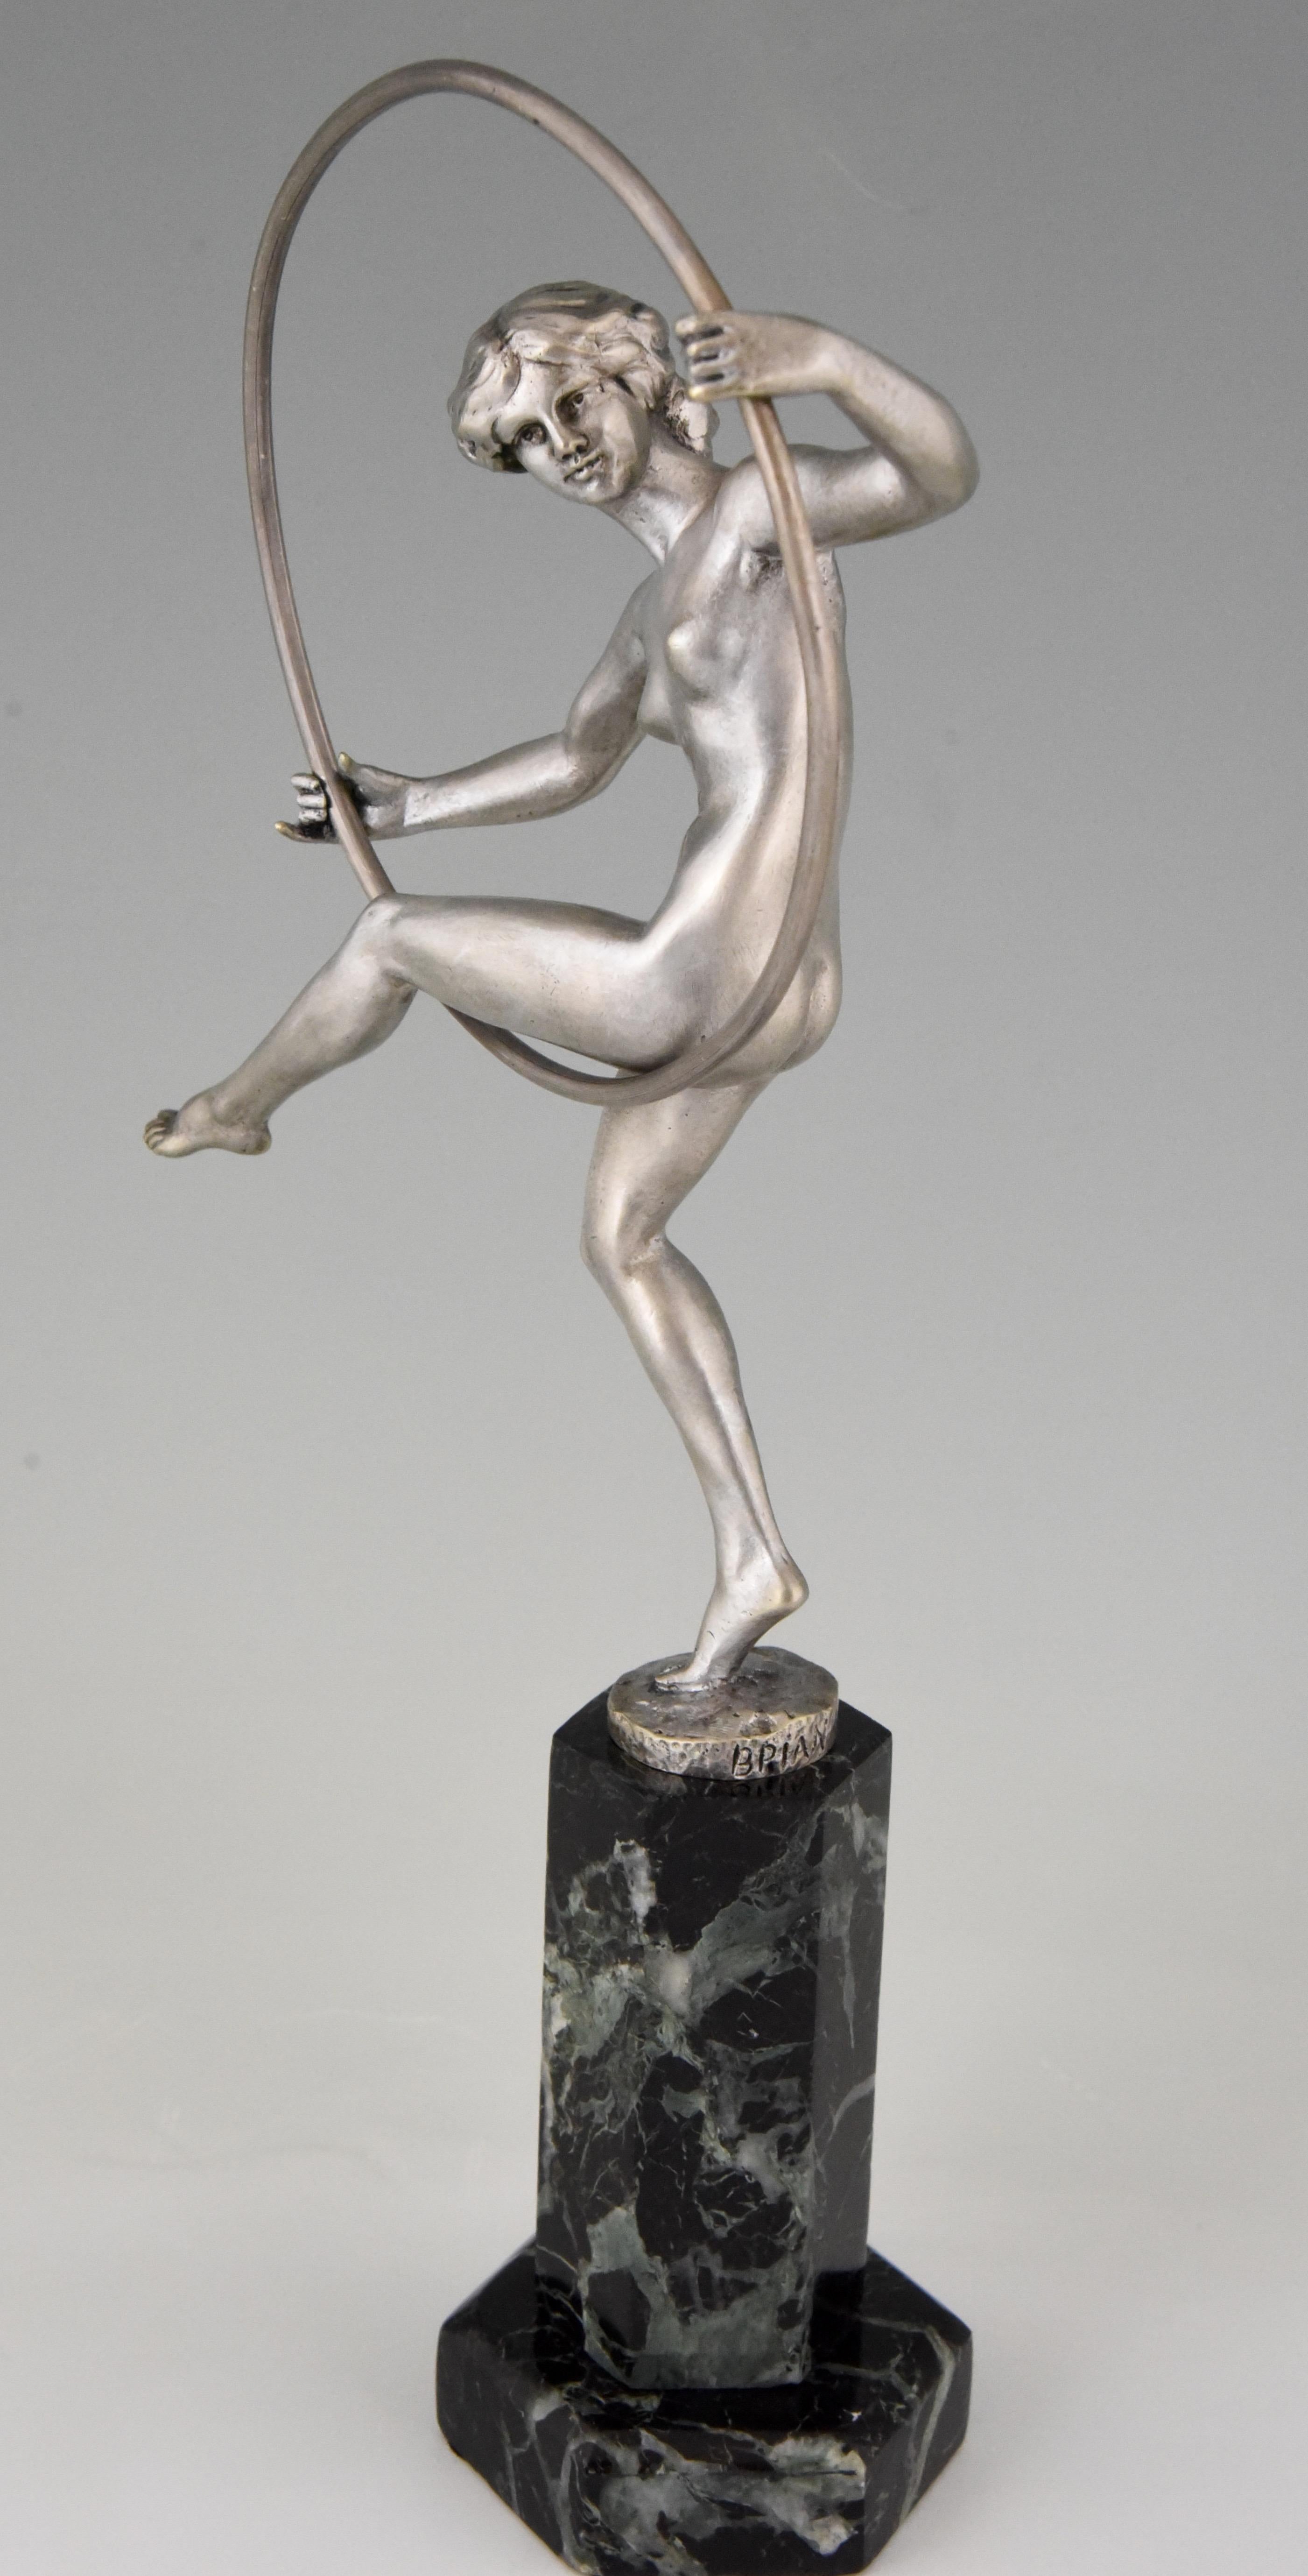 Art Deco bronze sculpture of a nude dancer with hoop. The bronze has a silver patina and stands on a green marble base. The work is signed Briand, pseudonym of Marcel Andre Bouraine, France 1920. 

“Art deco sculpture” by Victor Arwas, Academy.